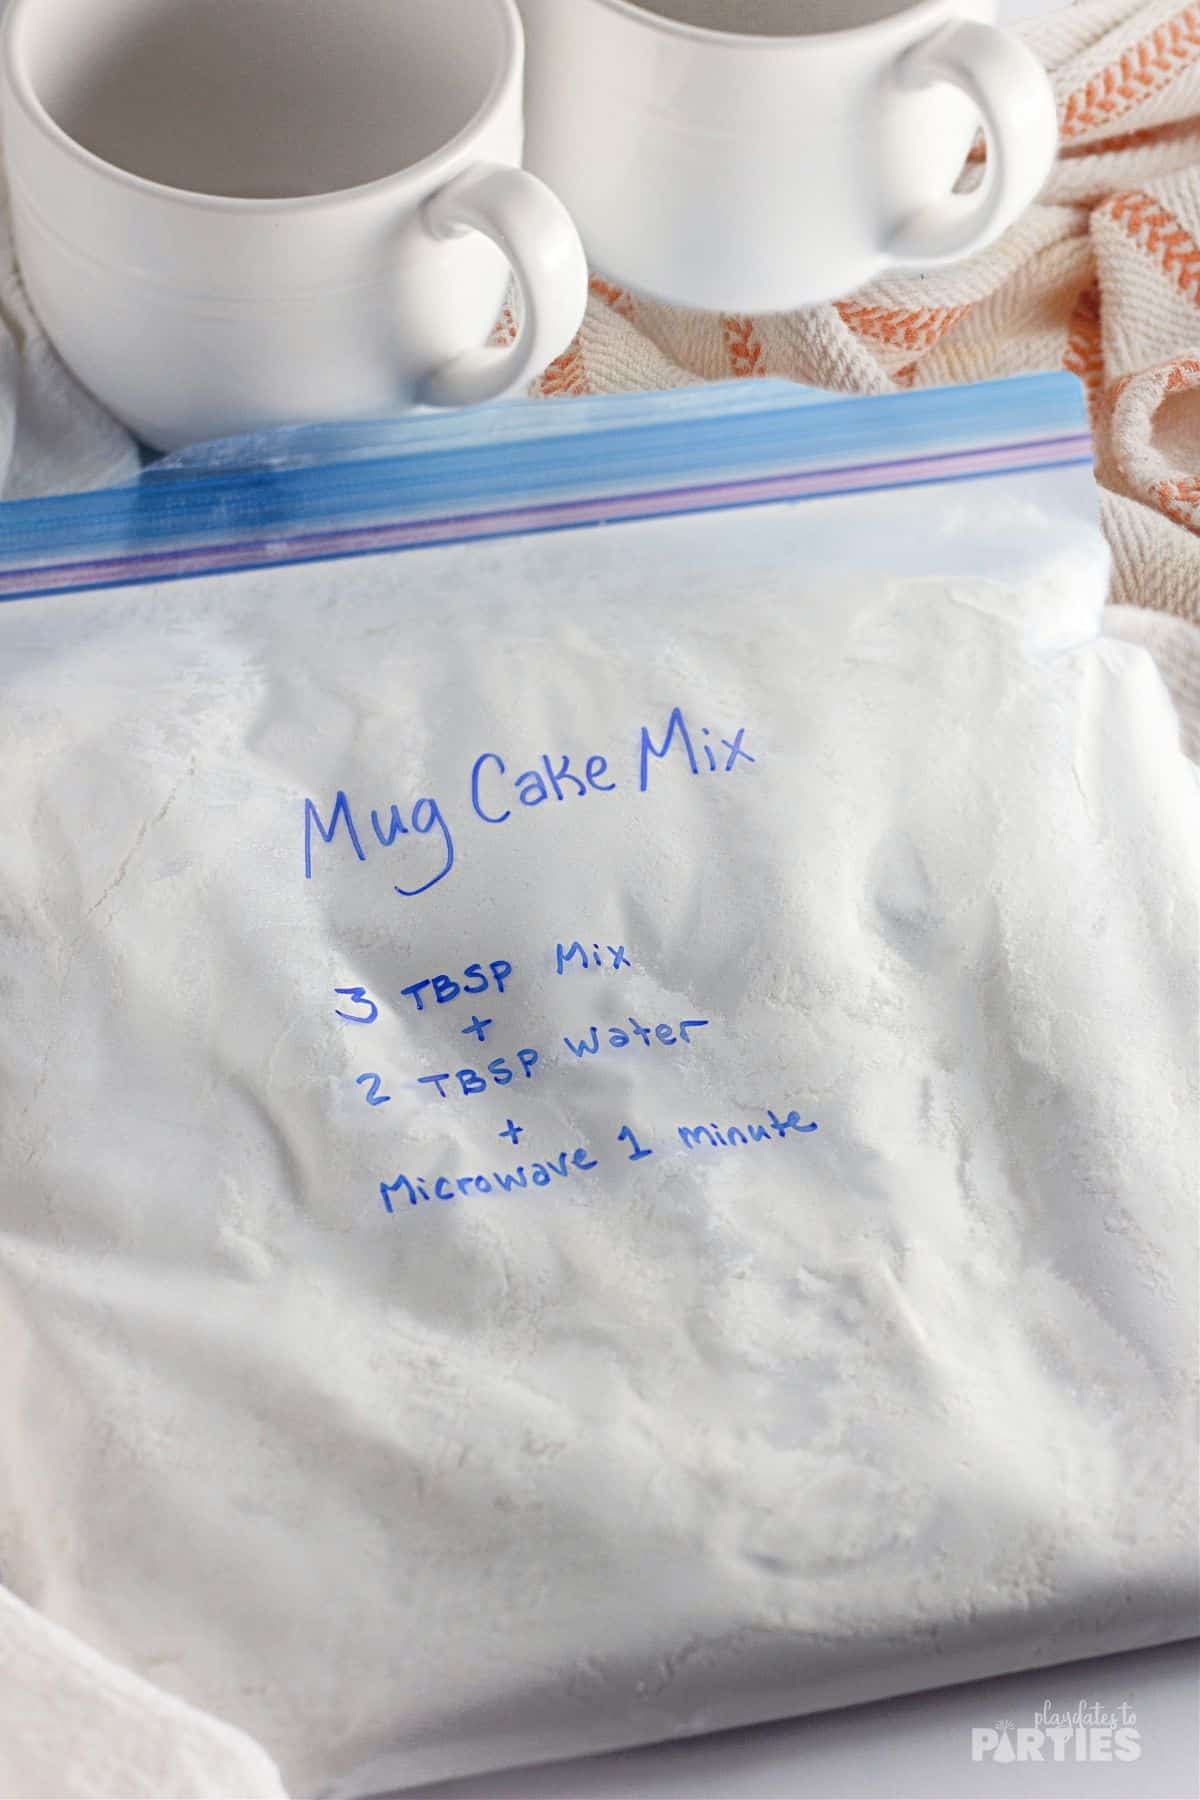 A ziplock bag with mug cake mix and the recipe for a single serving.